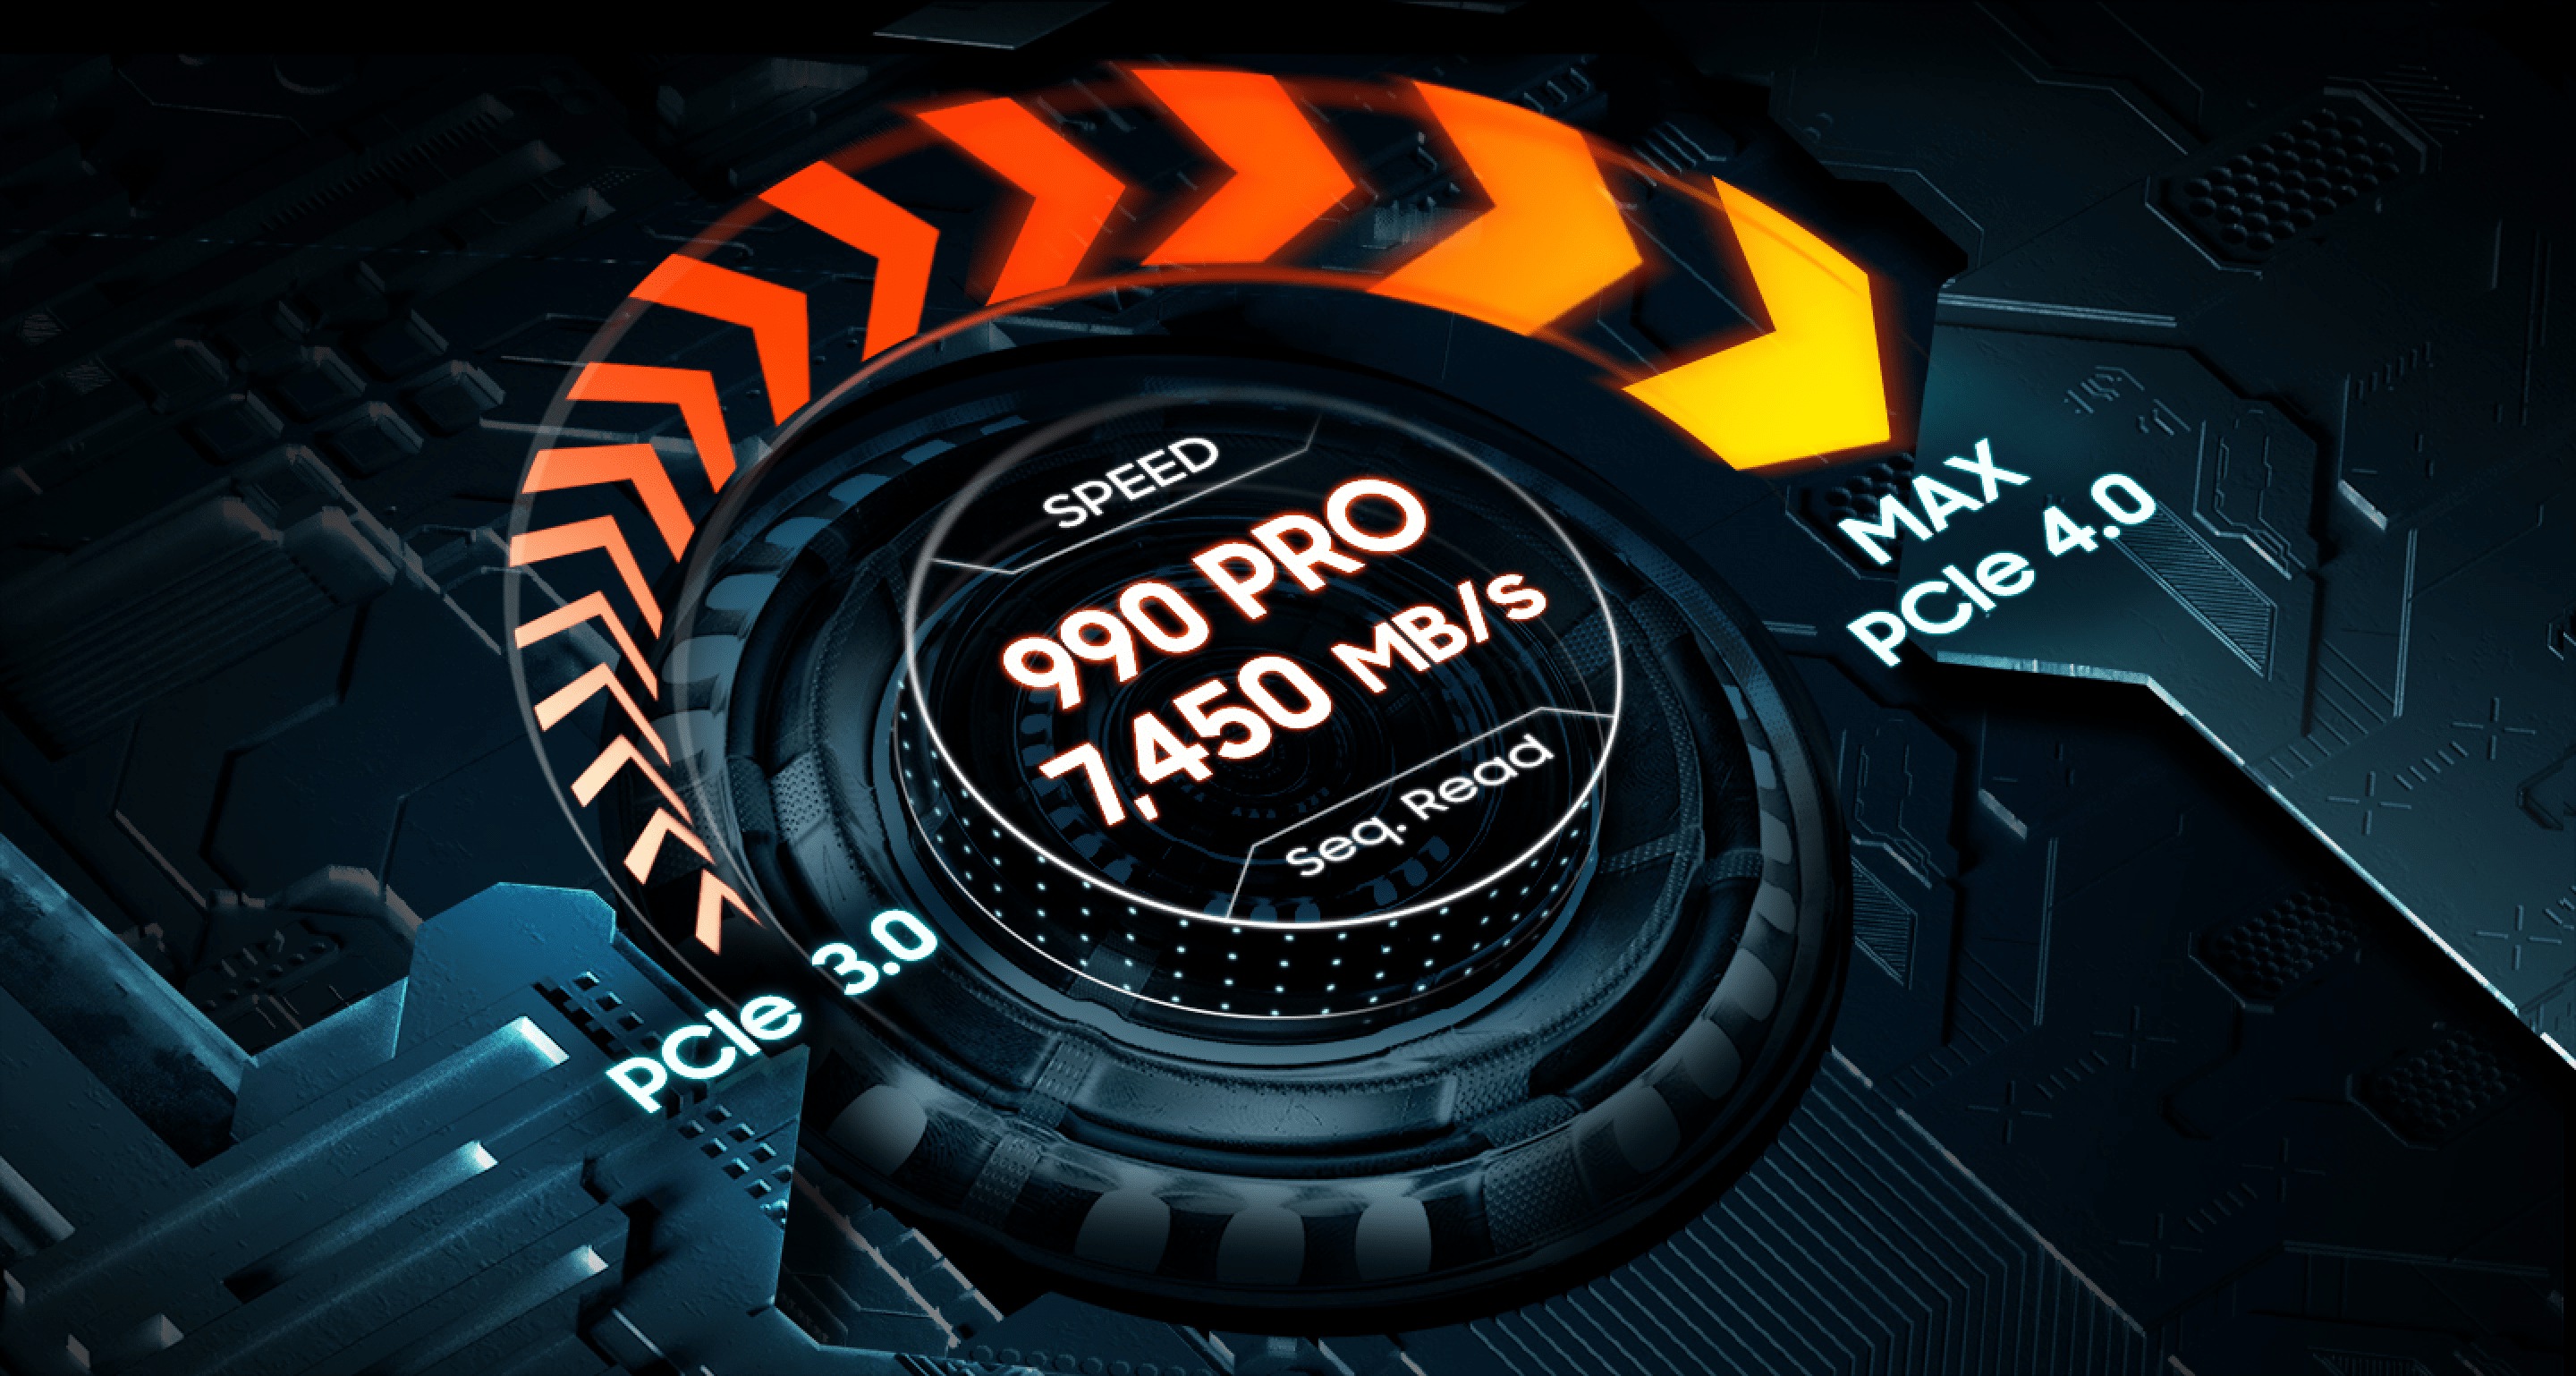 This is an image showing the performance of the 990 PRO with heatsink product against speed.